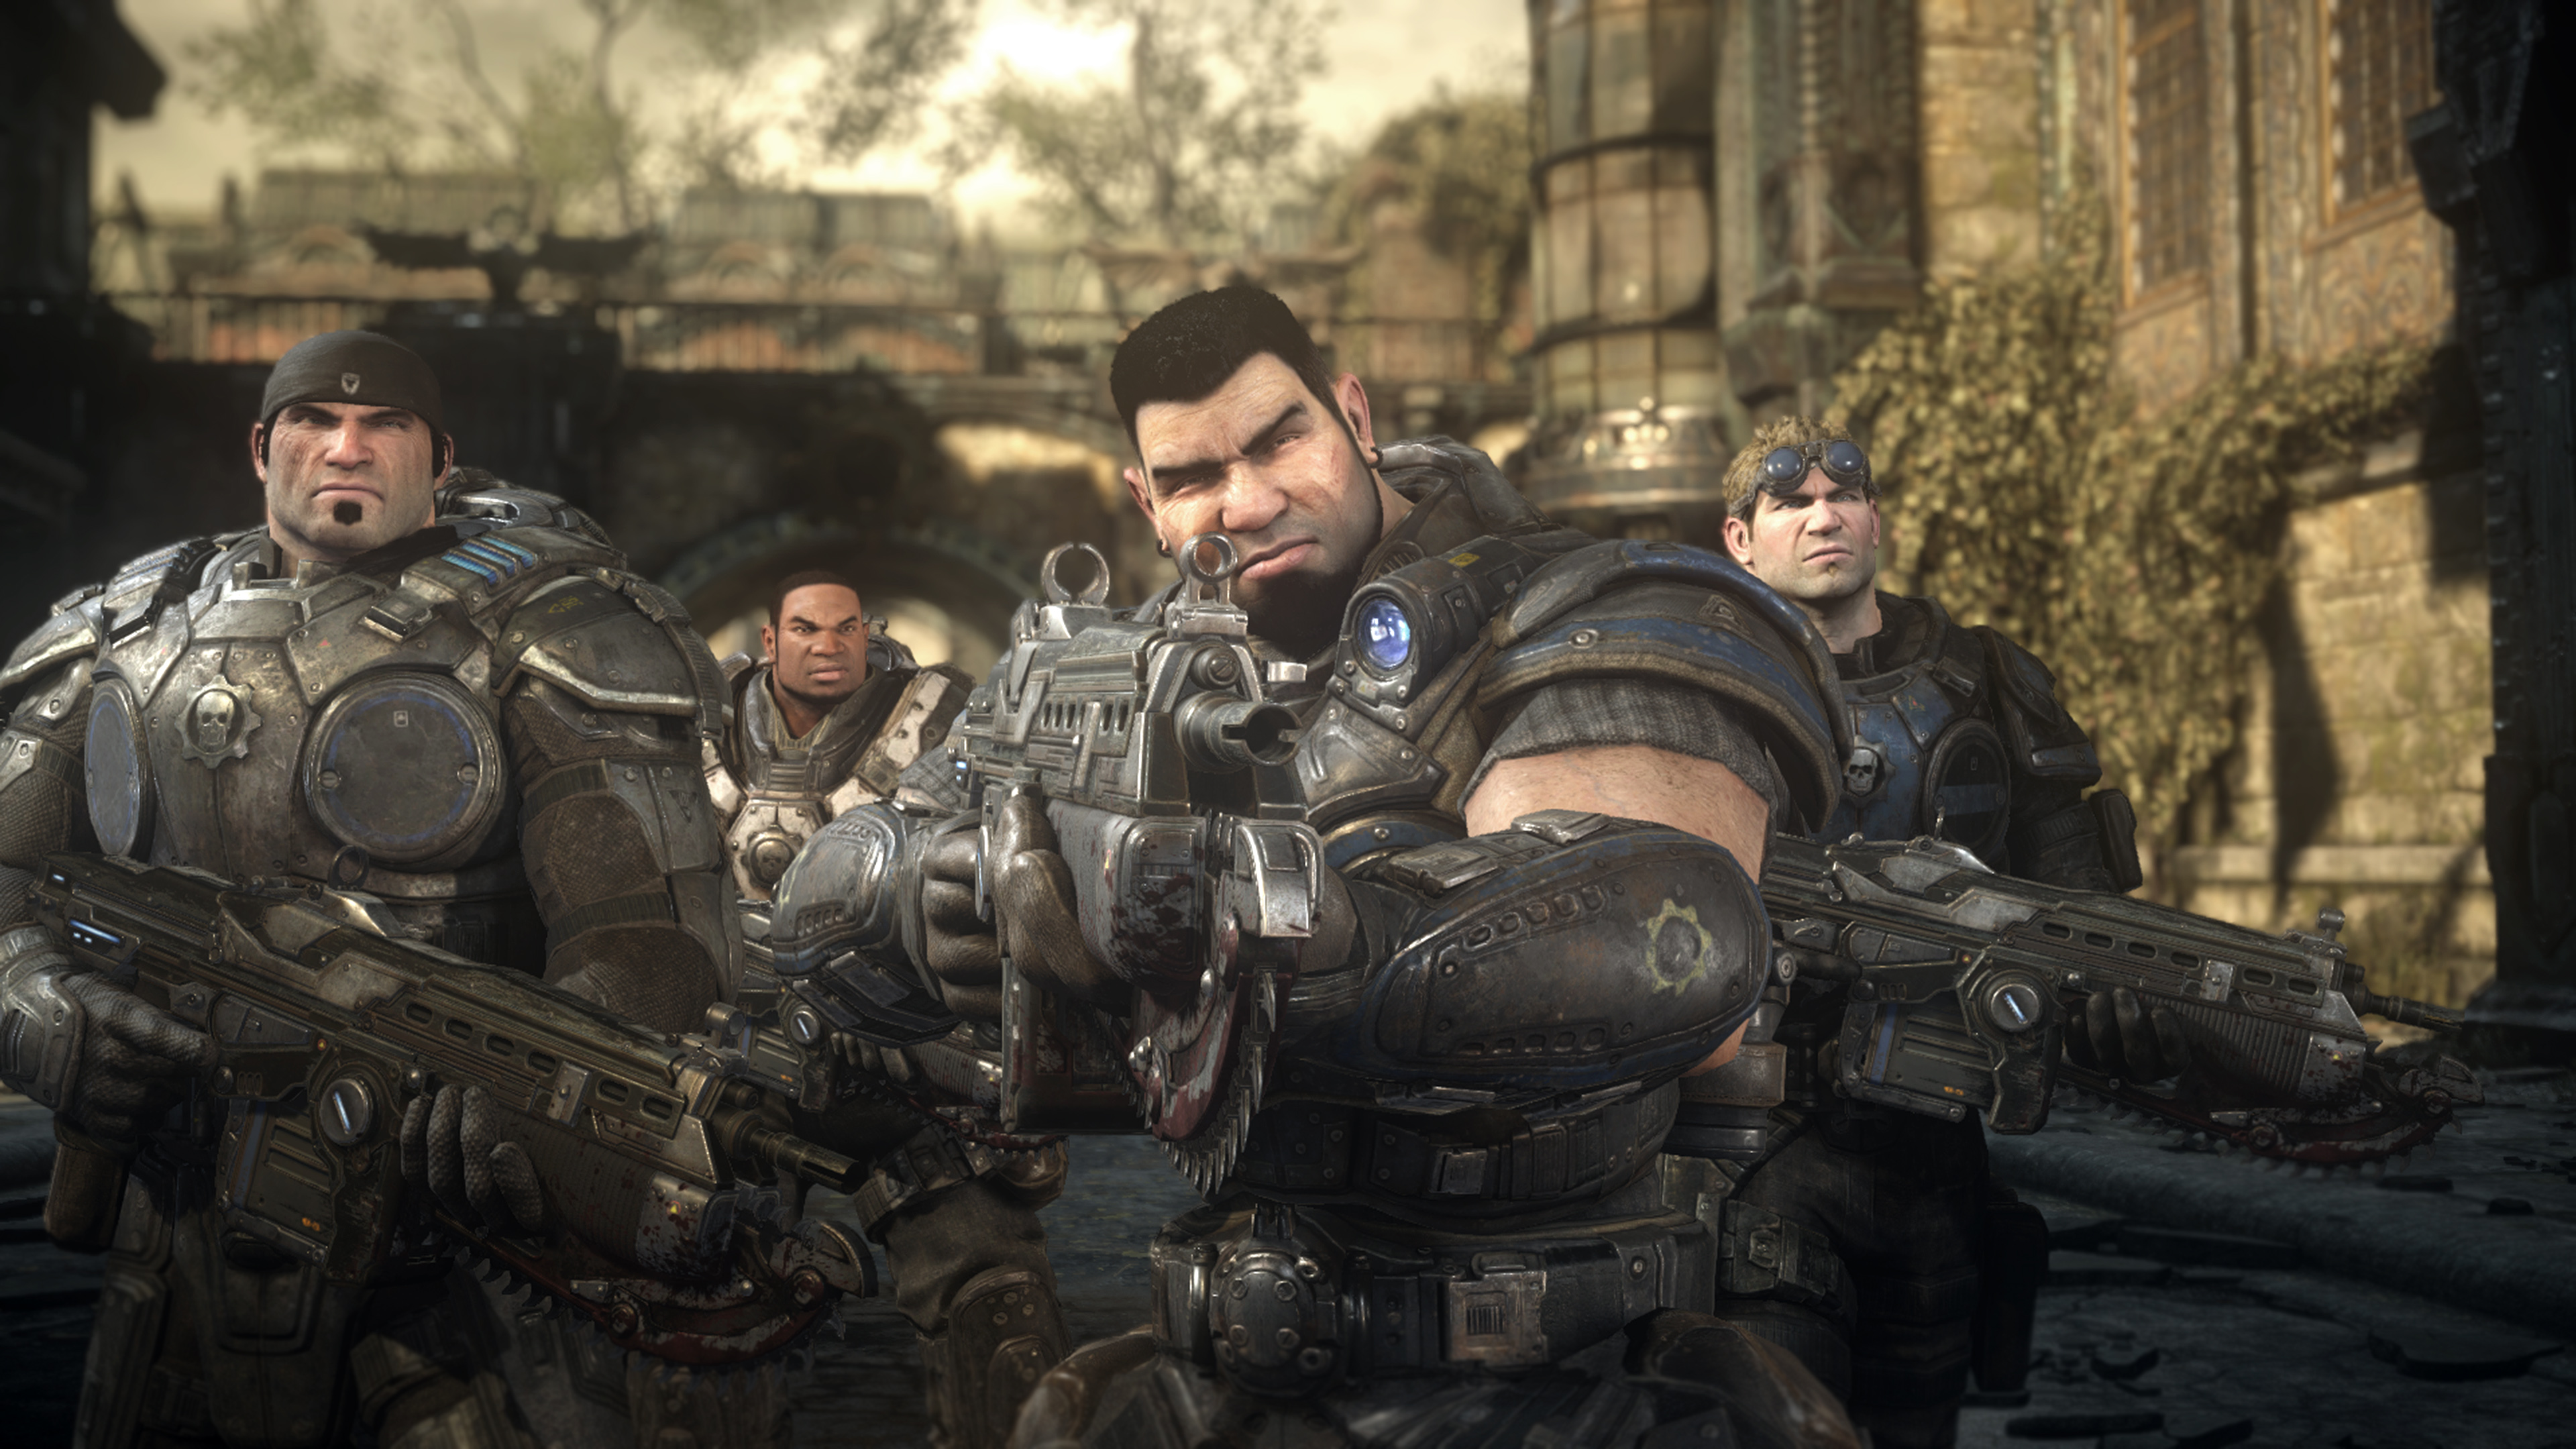 Gears of War 3 Preview - Gears Of War 3 Multiplayer Blowout - Game